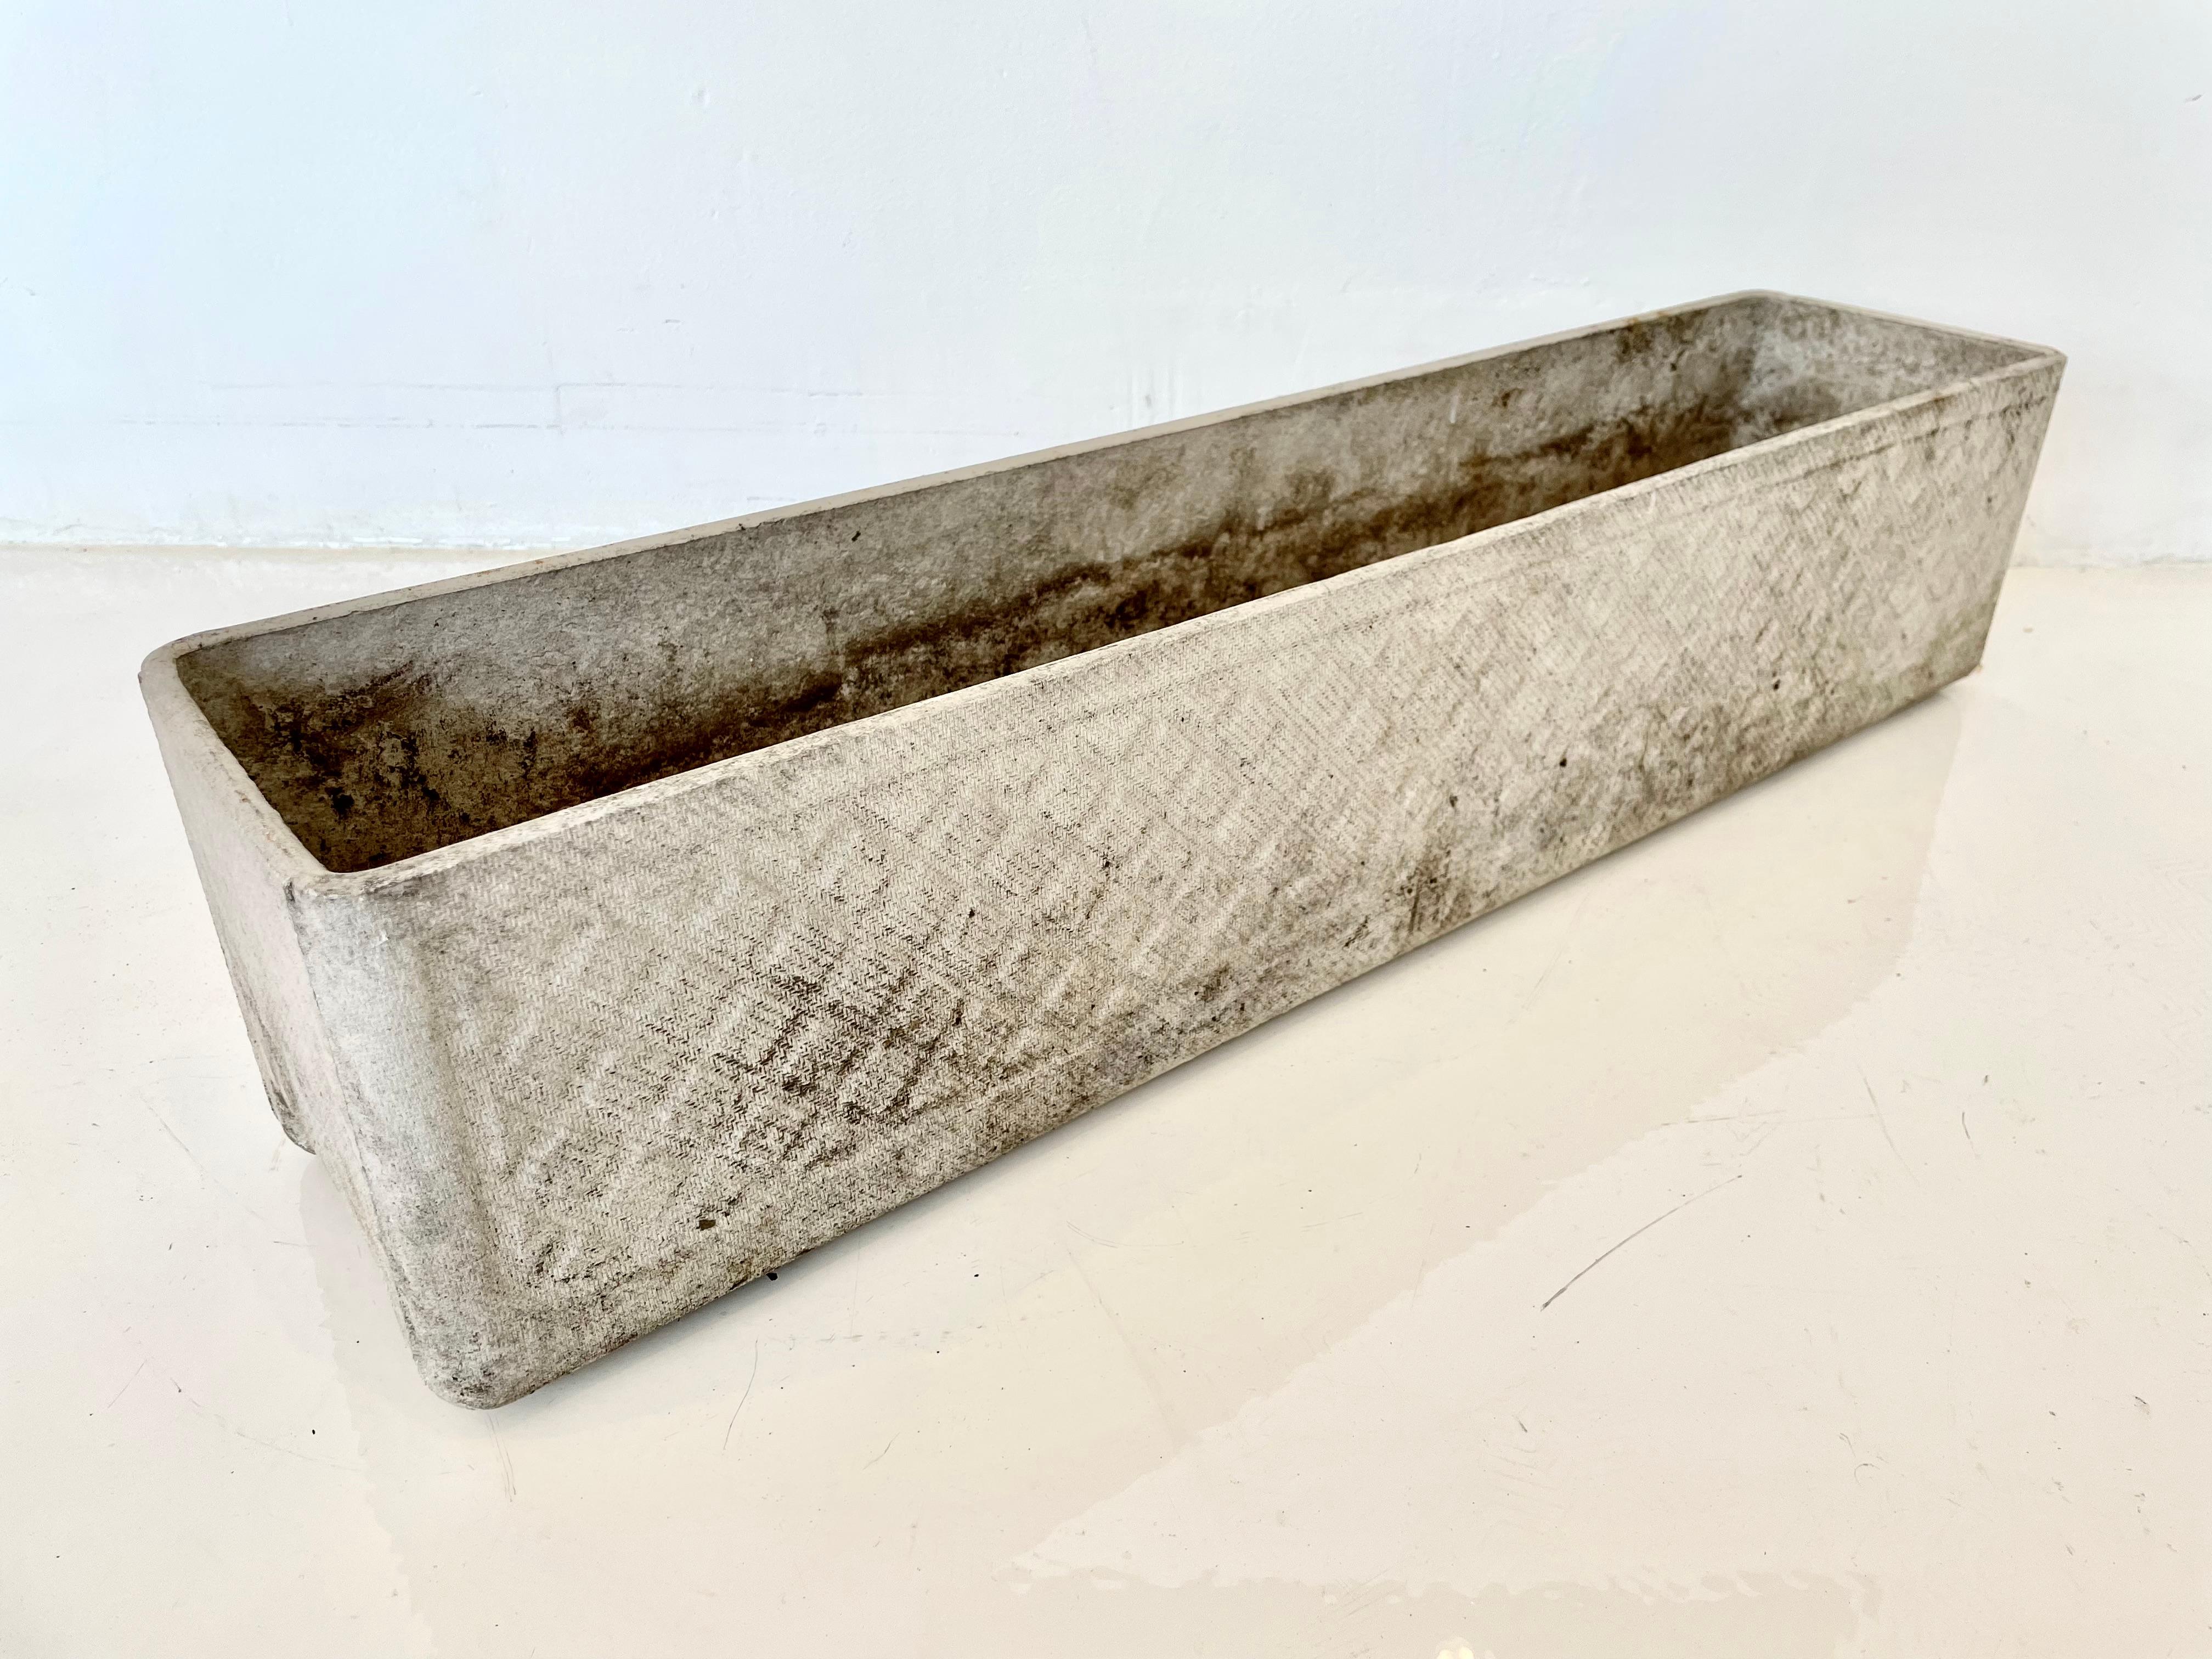 Concrete trough planters by Swiss architect Willy Guhl. Just under 32